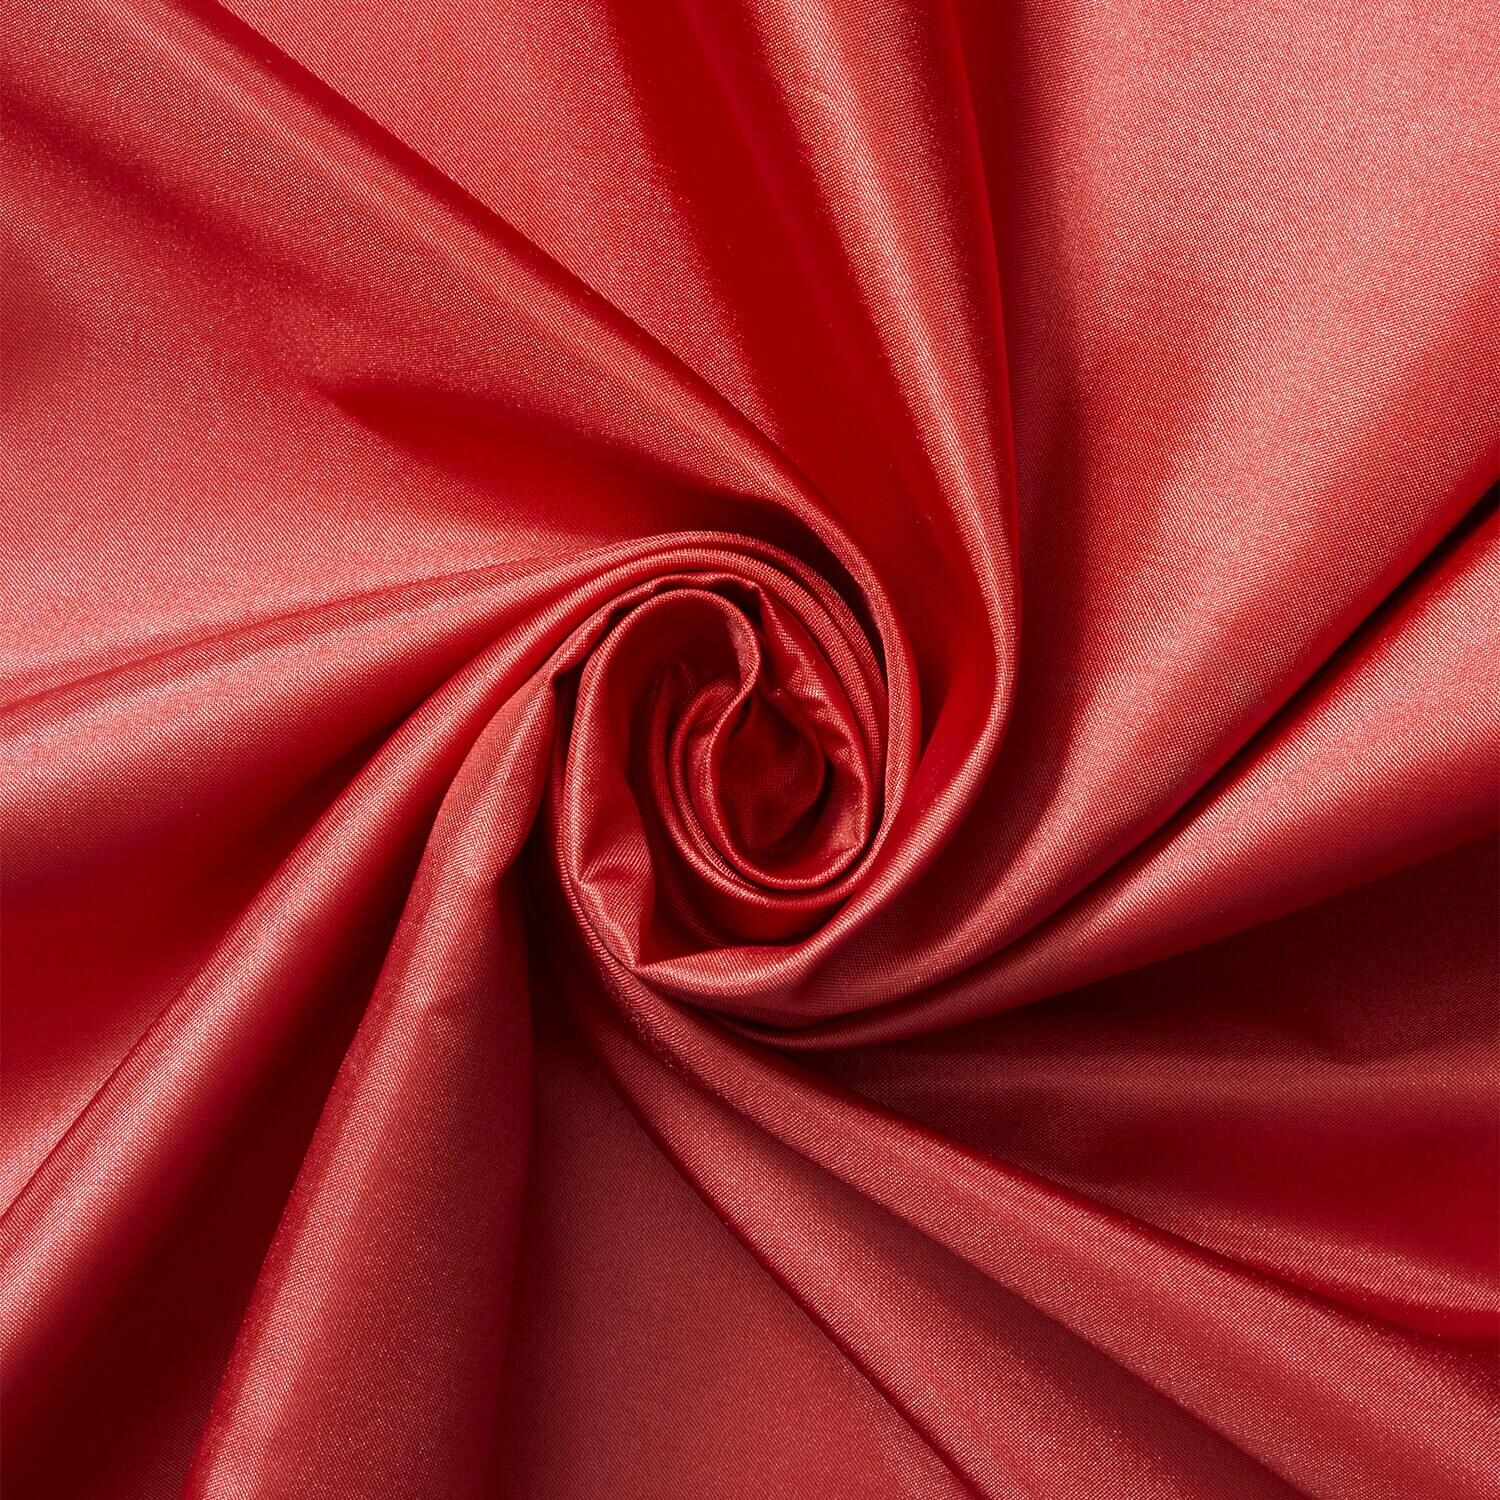 Maroon Satin Fabric for Lining - Light Weight